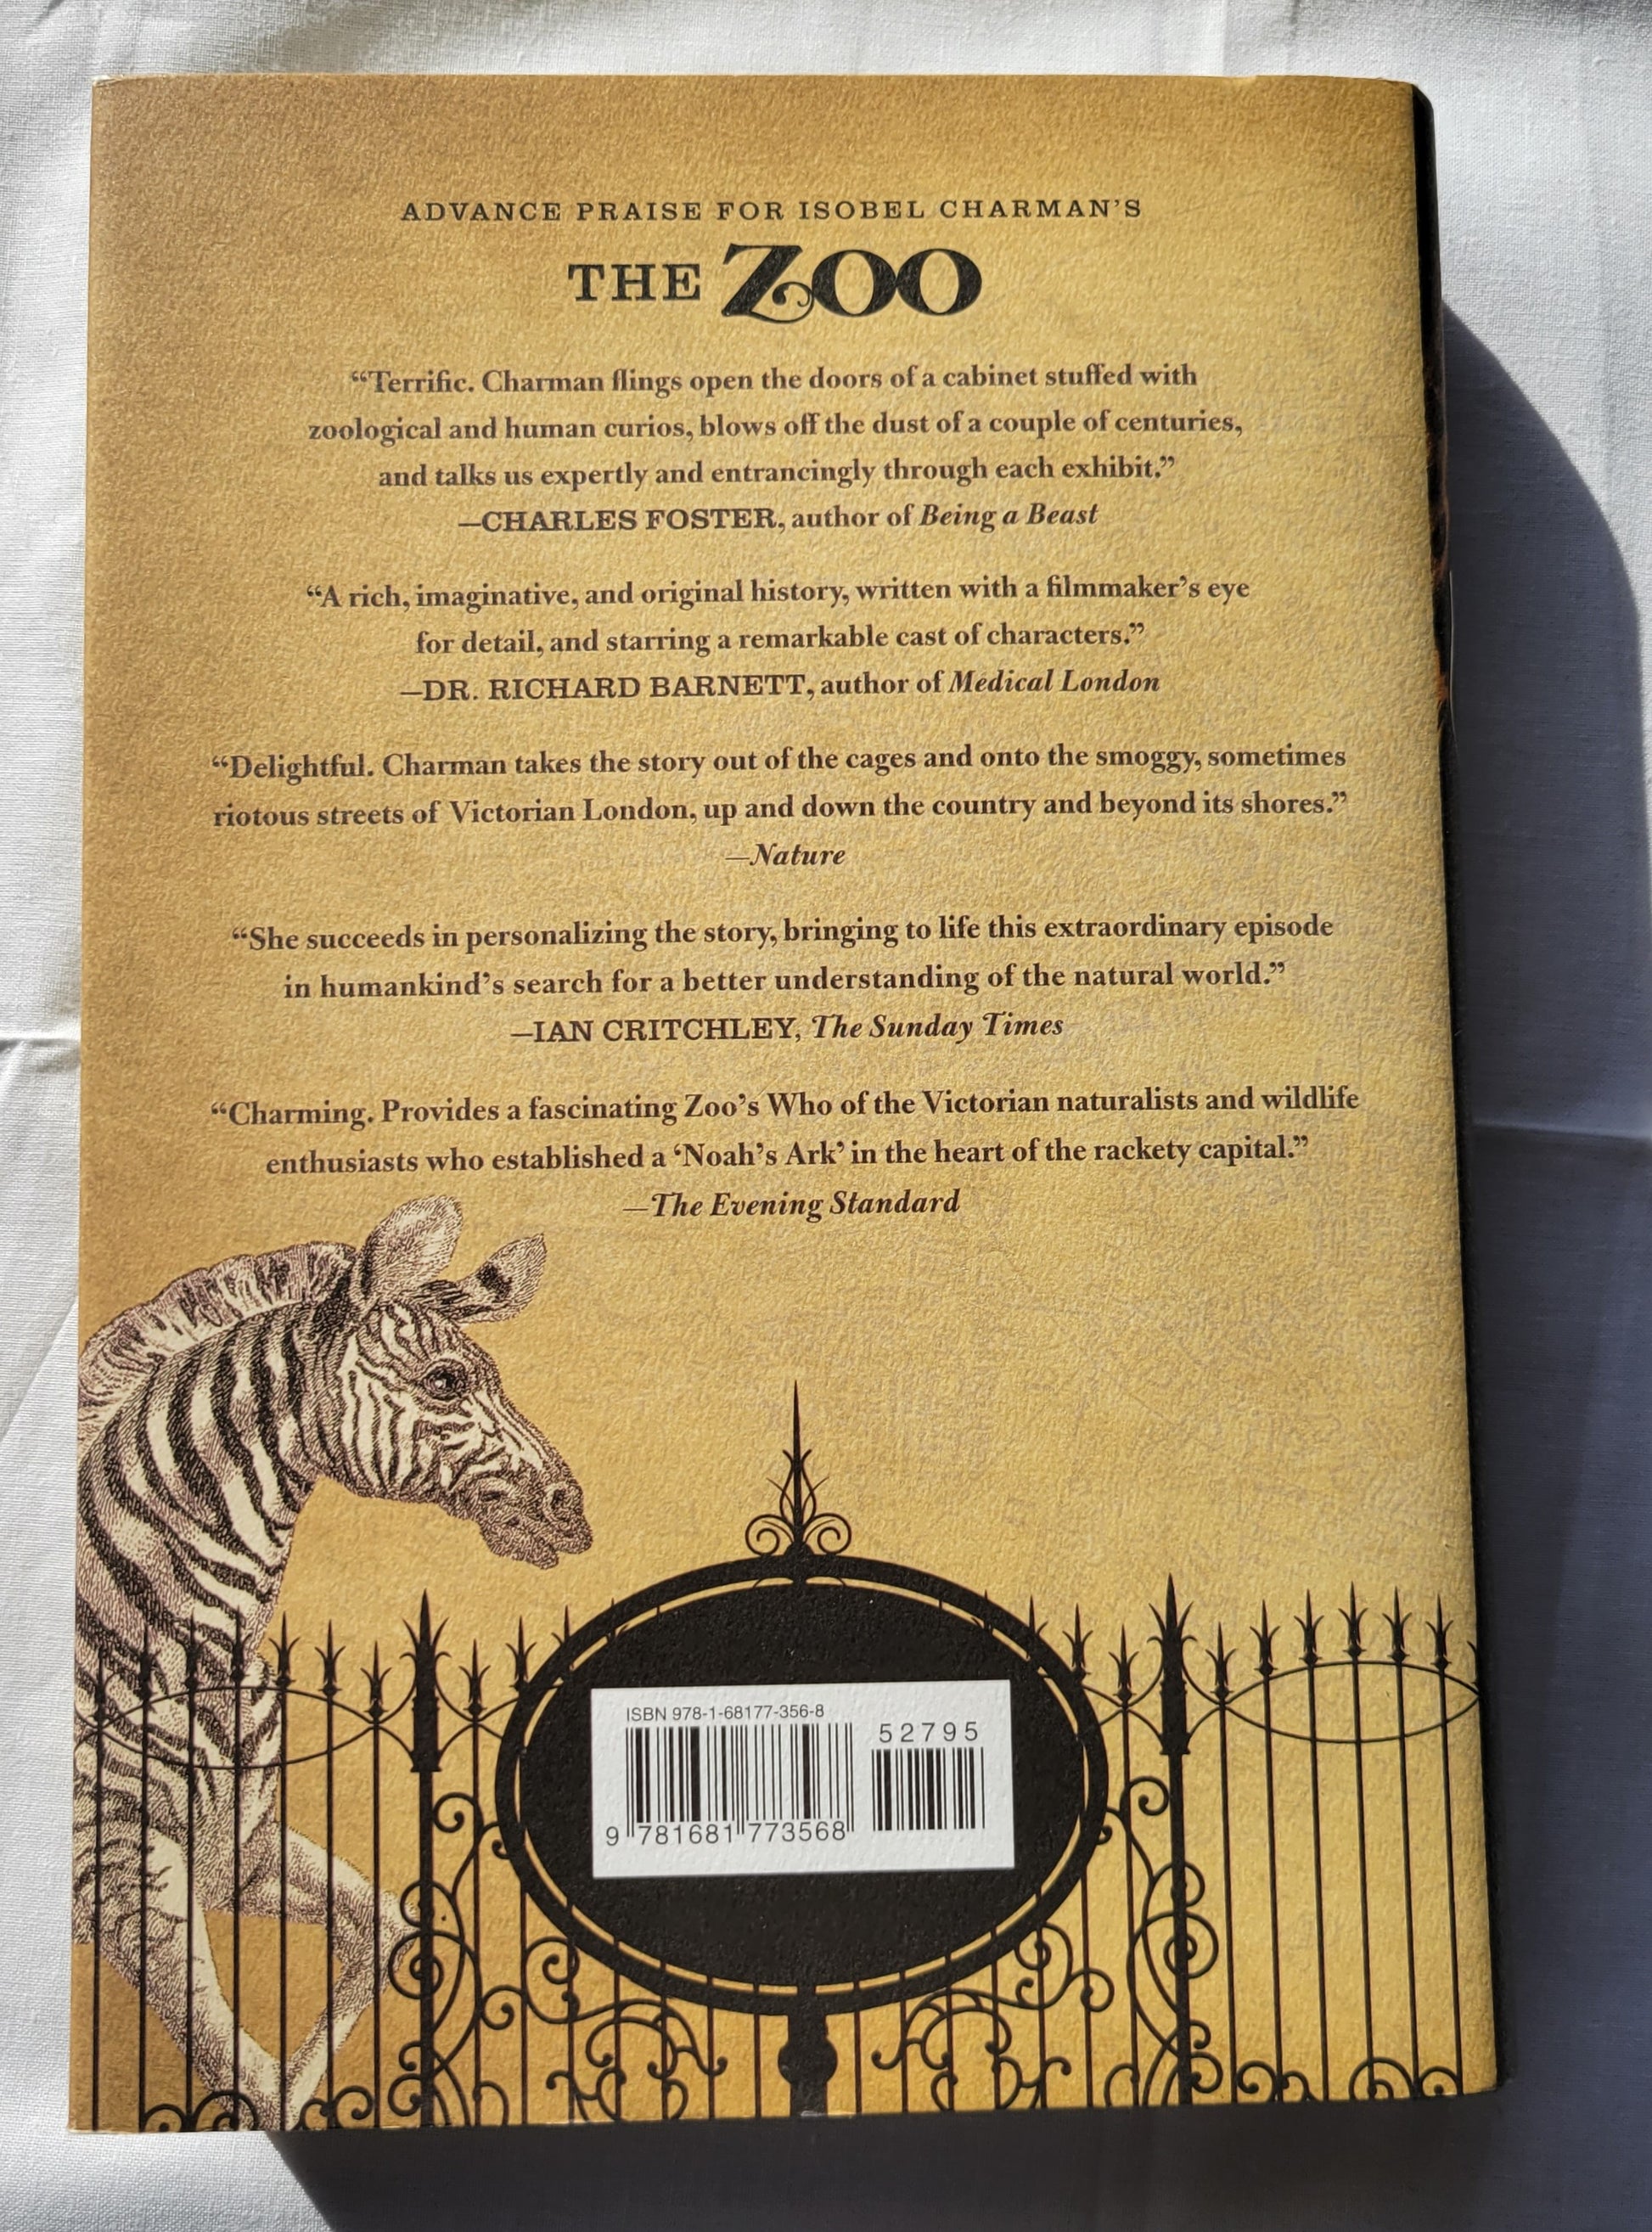 Used book for sale "The Zoo" by Isobel Charman, published by Pegasus Books, reprint edition 2018. Back cover.